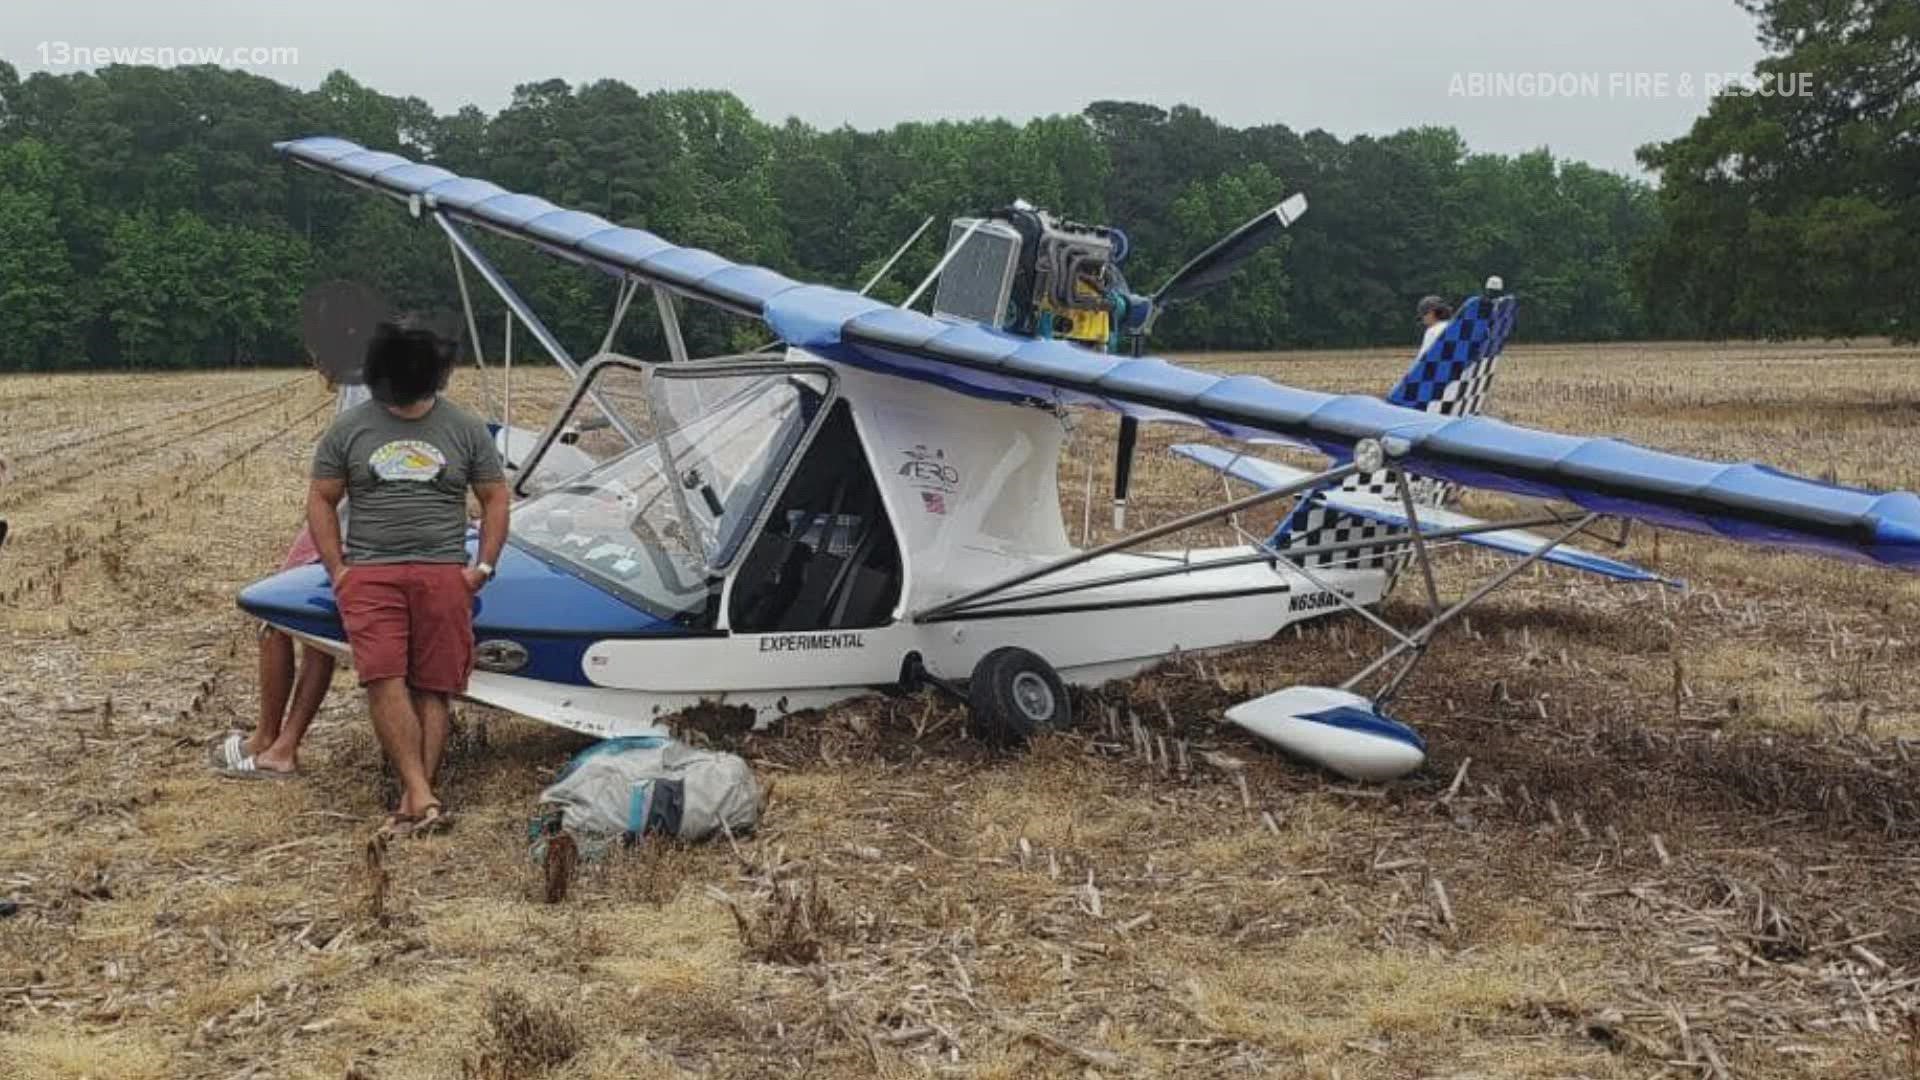 VSP said two people were aboard the plane; however, they were not injured in the crash.